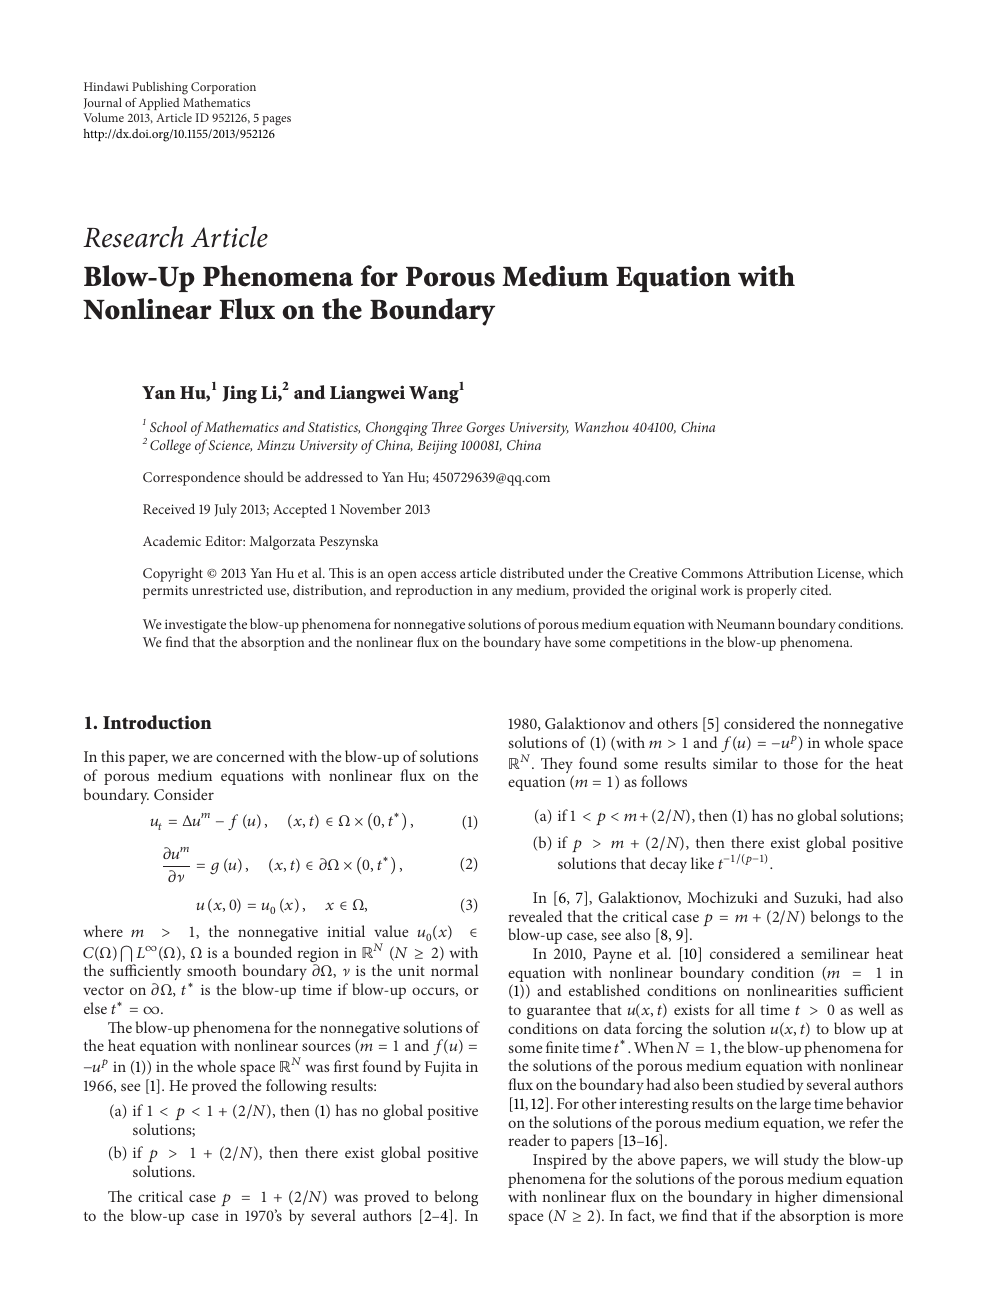 Blow Up Phenomena For Porous Medium Equation With Nonlinear Flux On The Boundary Topic Of Research Paper In Mathematics Download Scholarly Article Pdf And Read For Free On Cyberleninka Open Science Hub